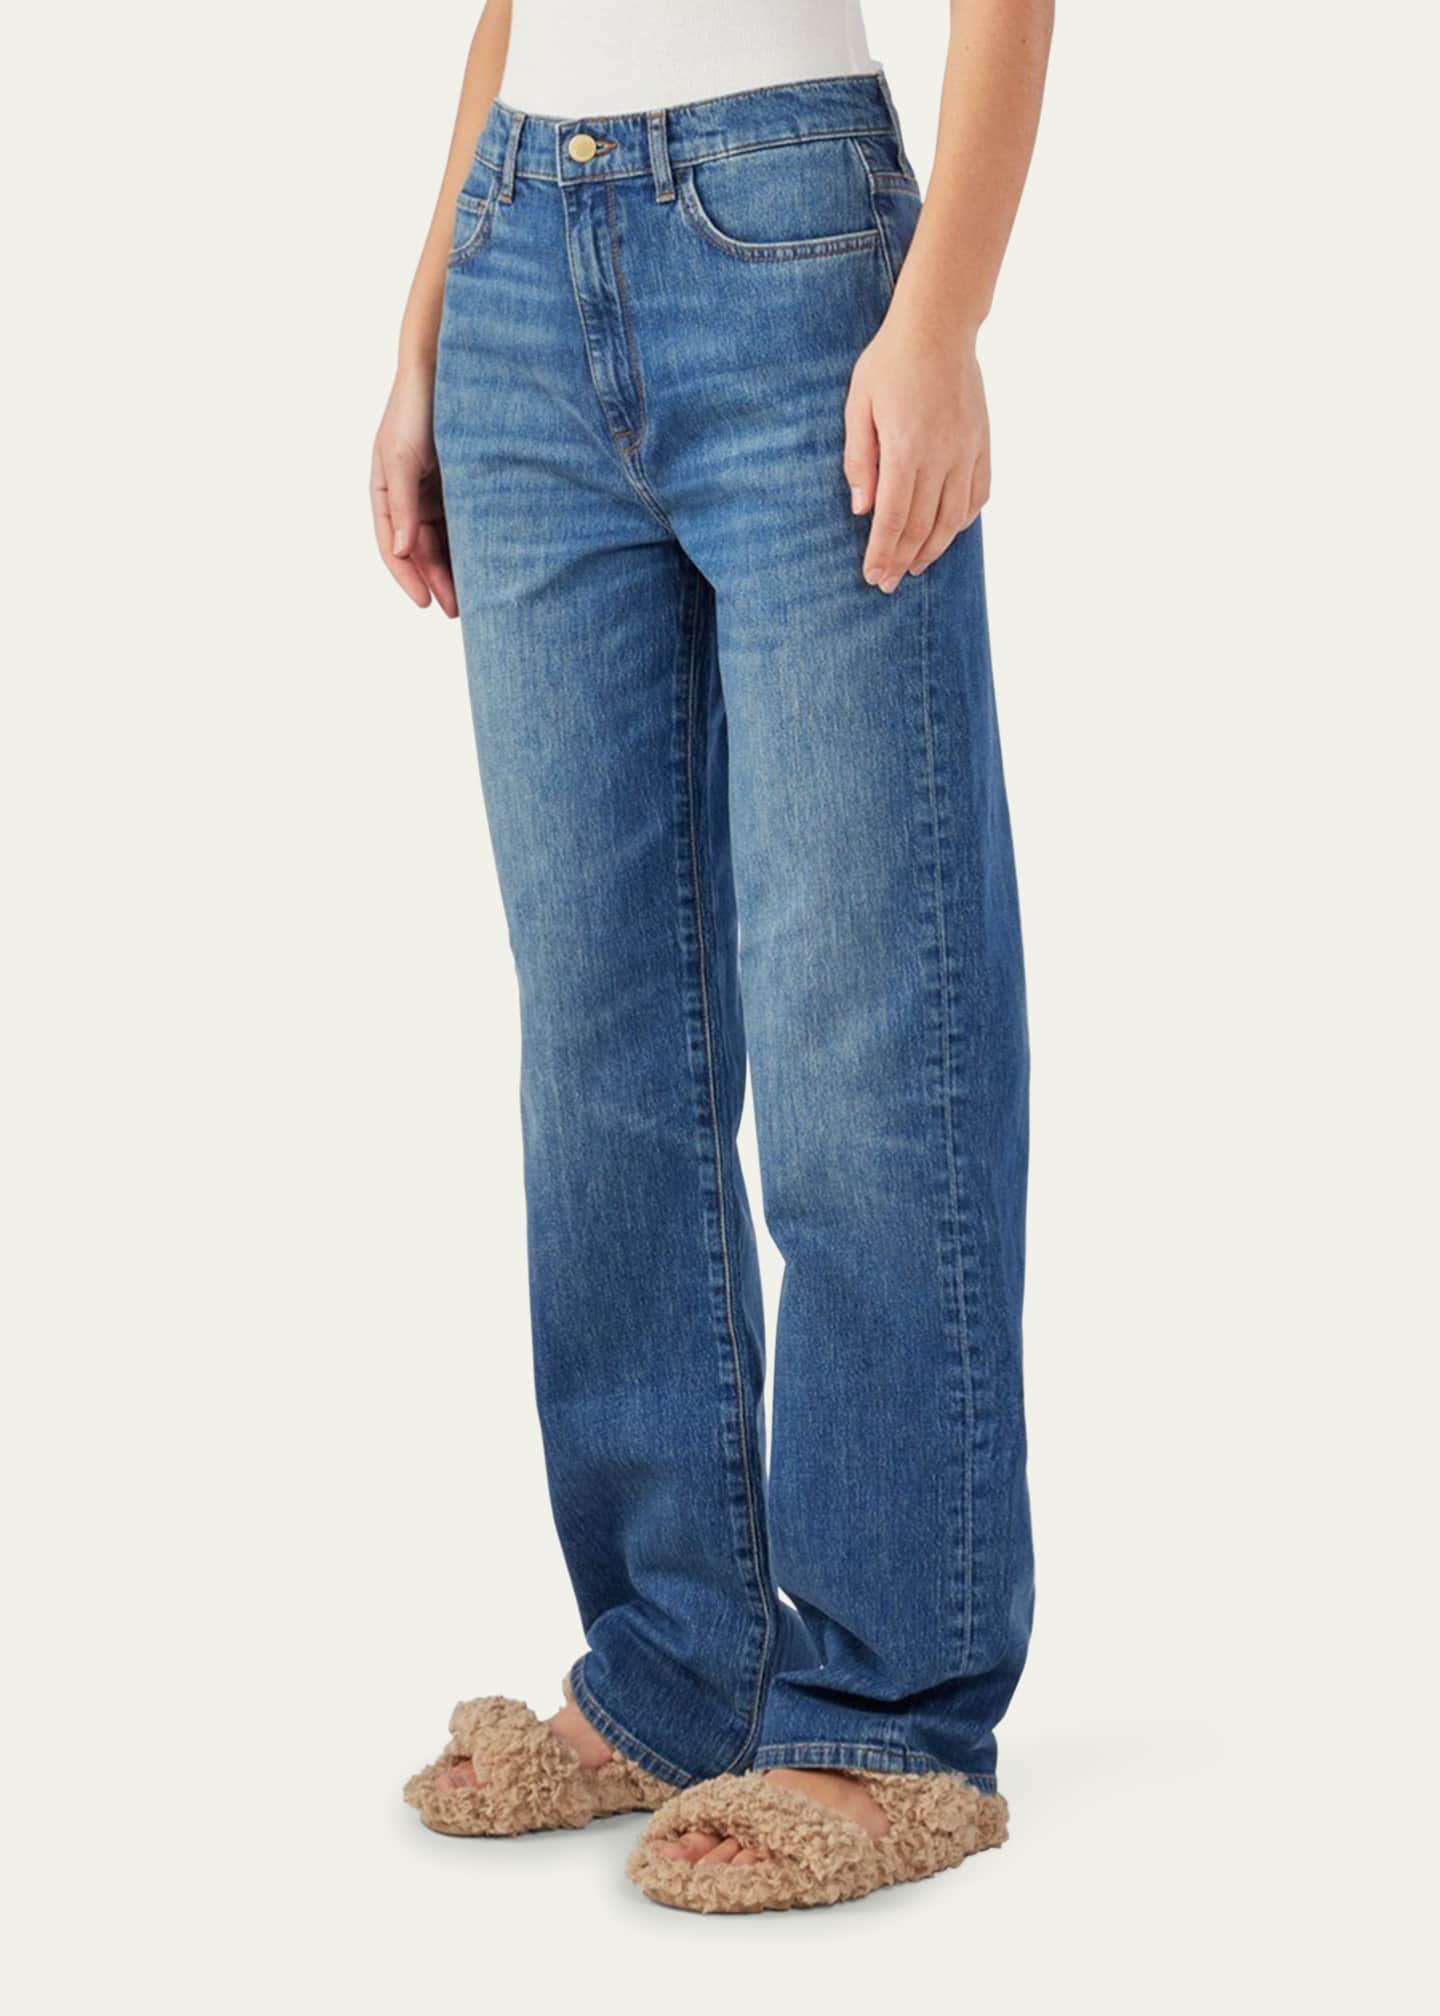 Triarchy Ms. Keaton High-Rise Baggy Jeans - Bergdorf Goodman